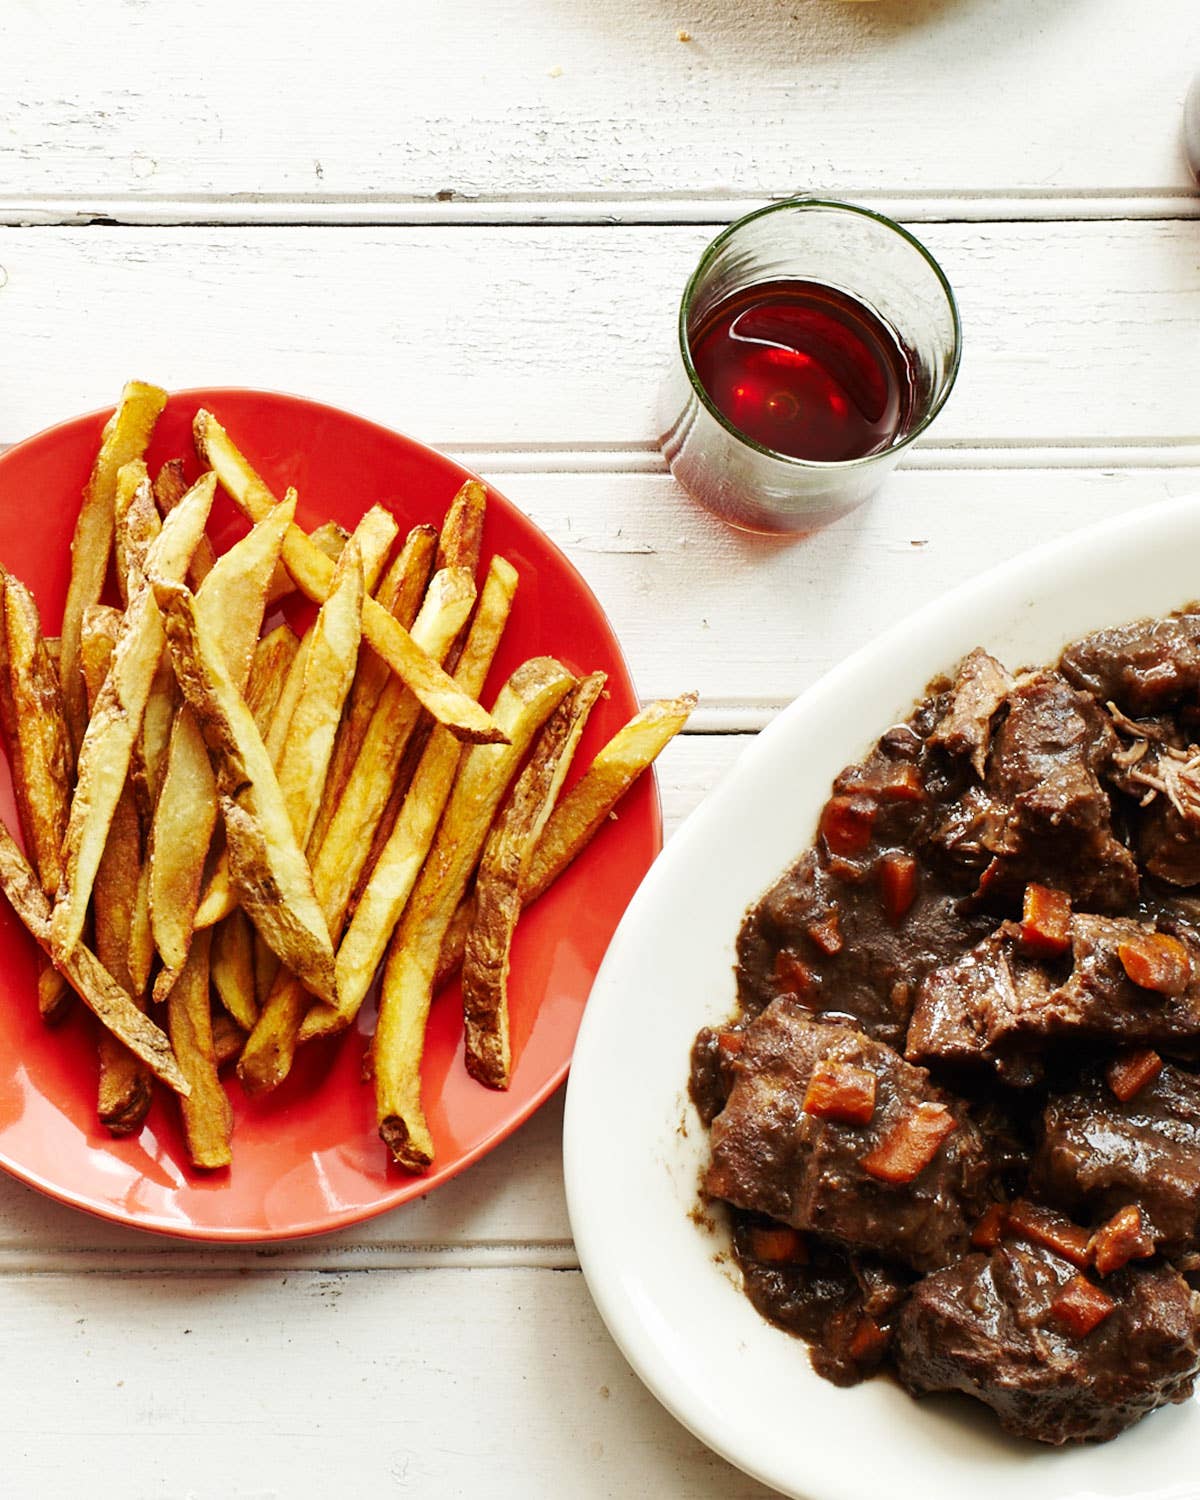 The Easy Beef Stew We Can’t Stop Thinking About